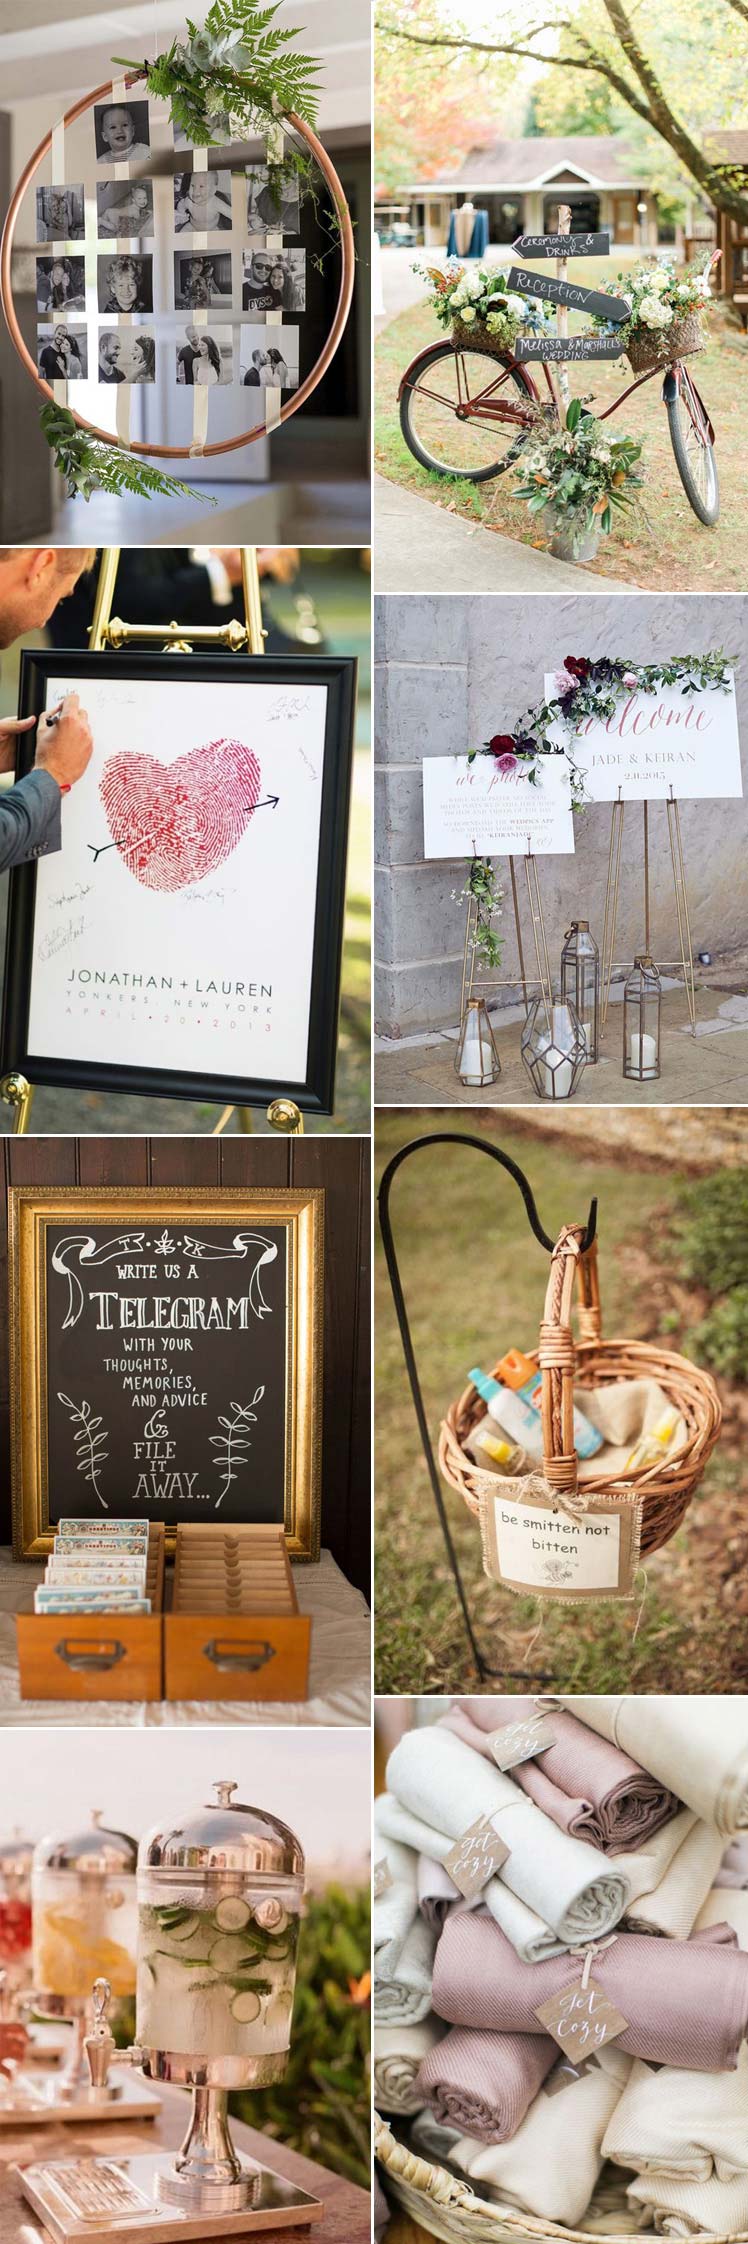 Special touches your wedding guests will appreciate